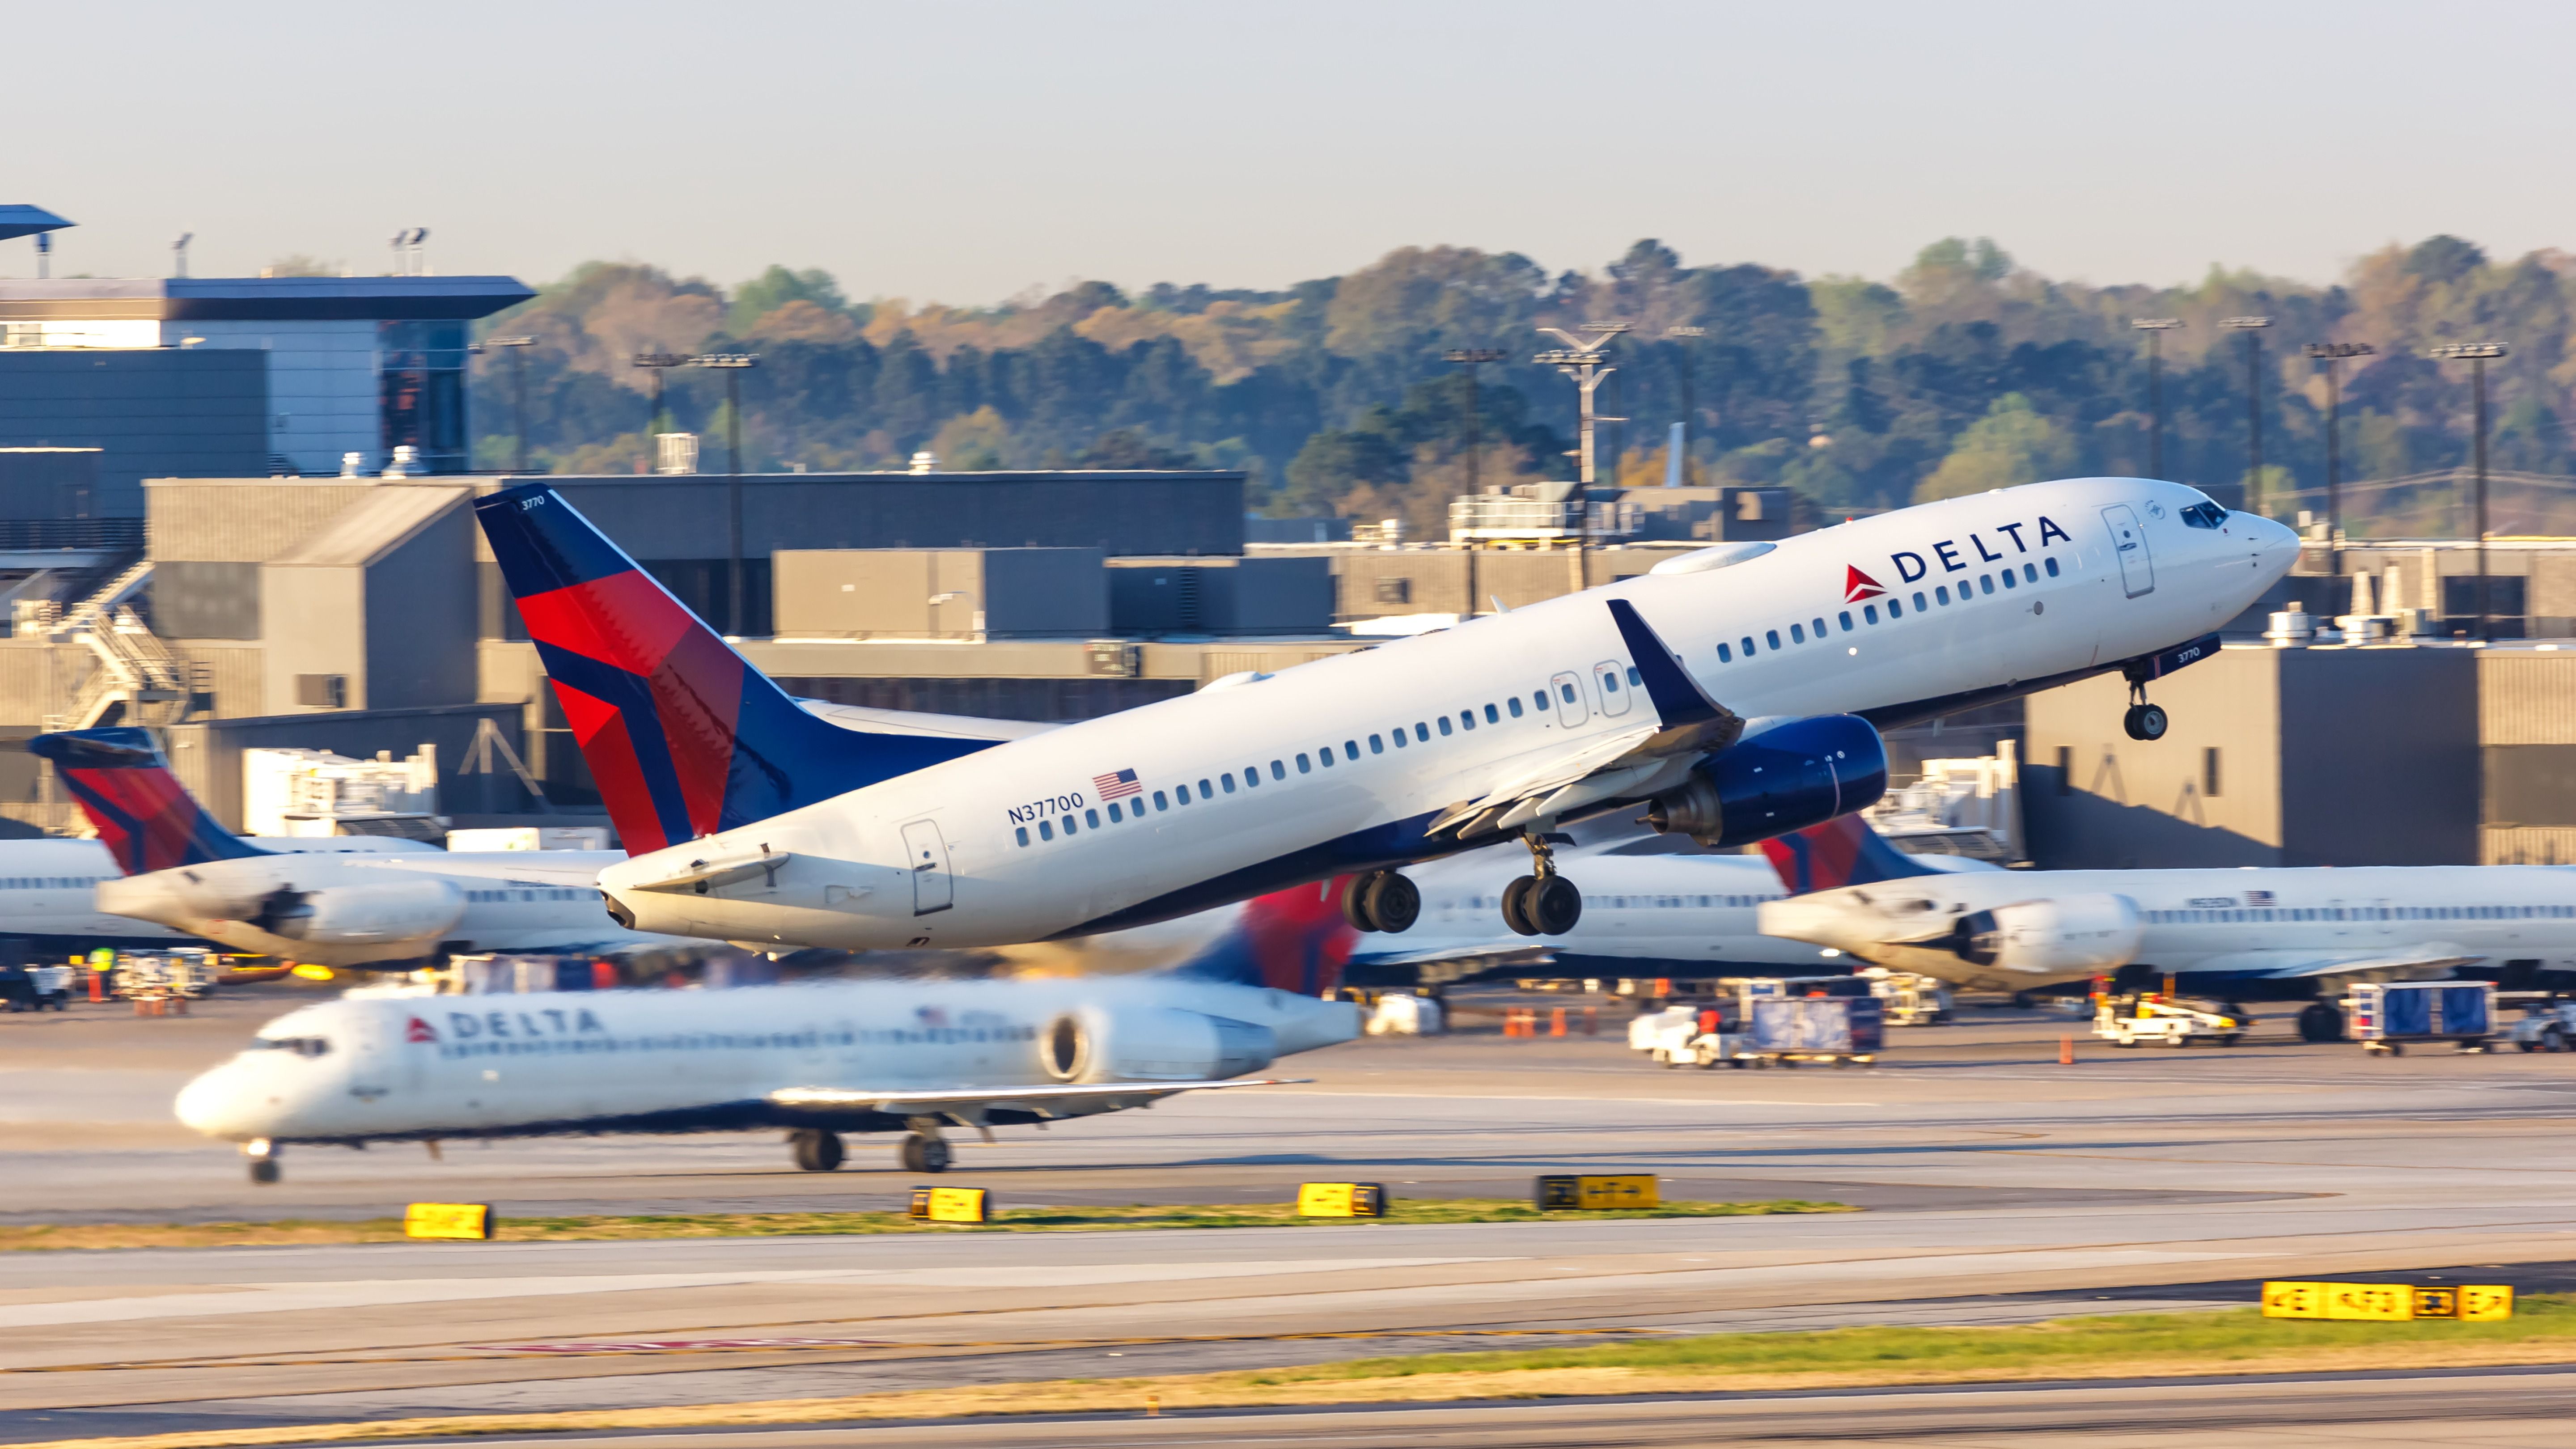 Apply now to become a Delta flight attendant